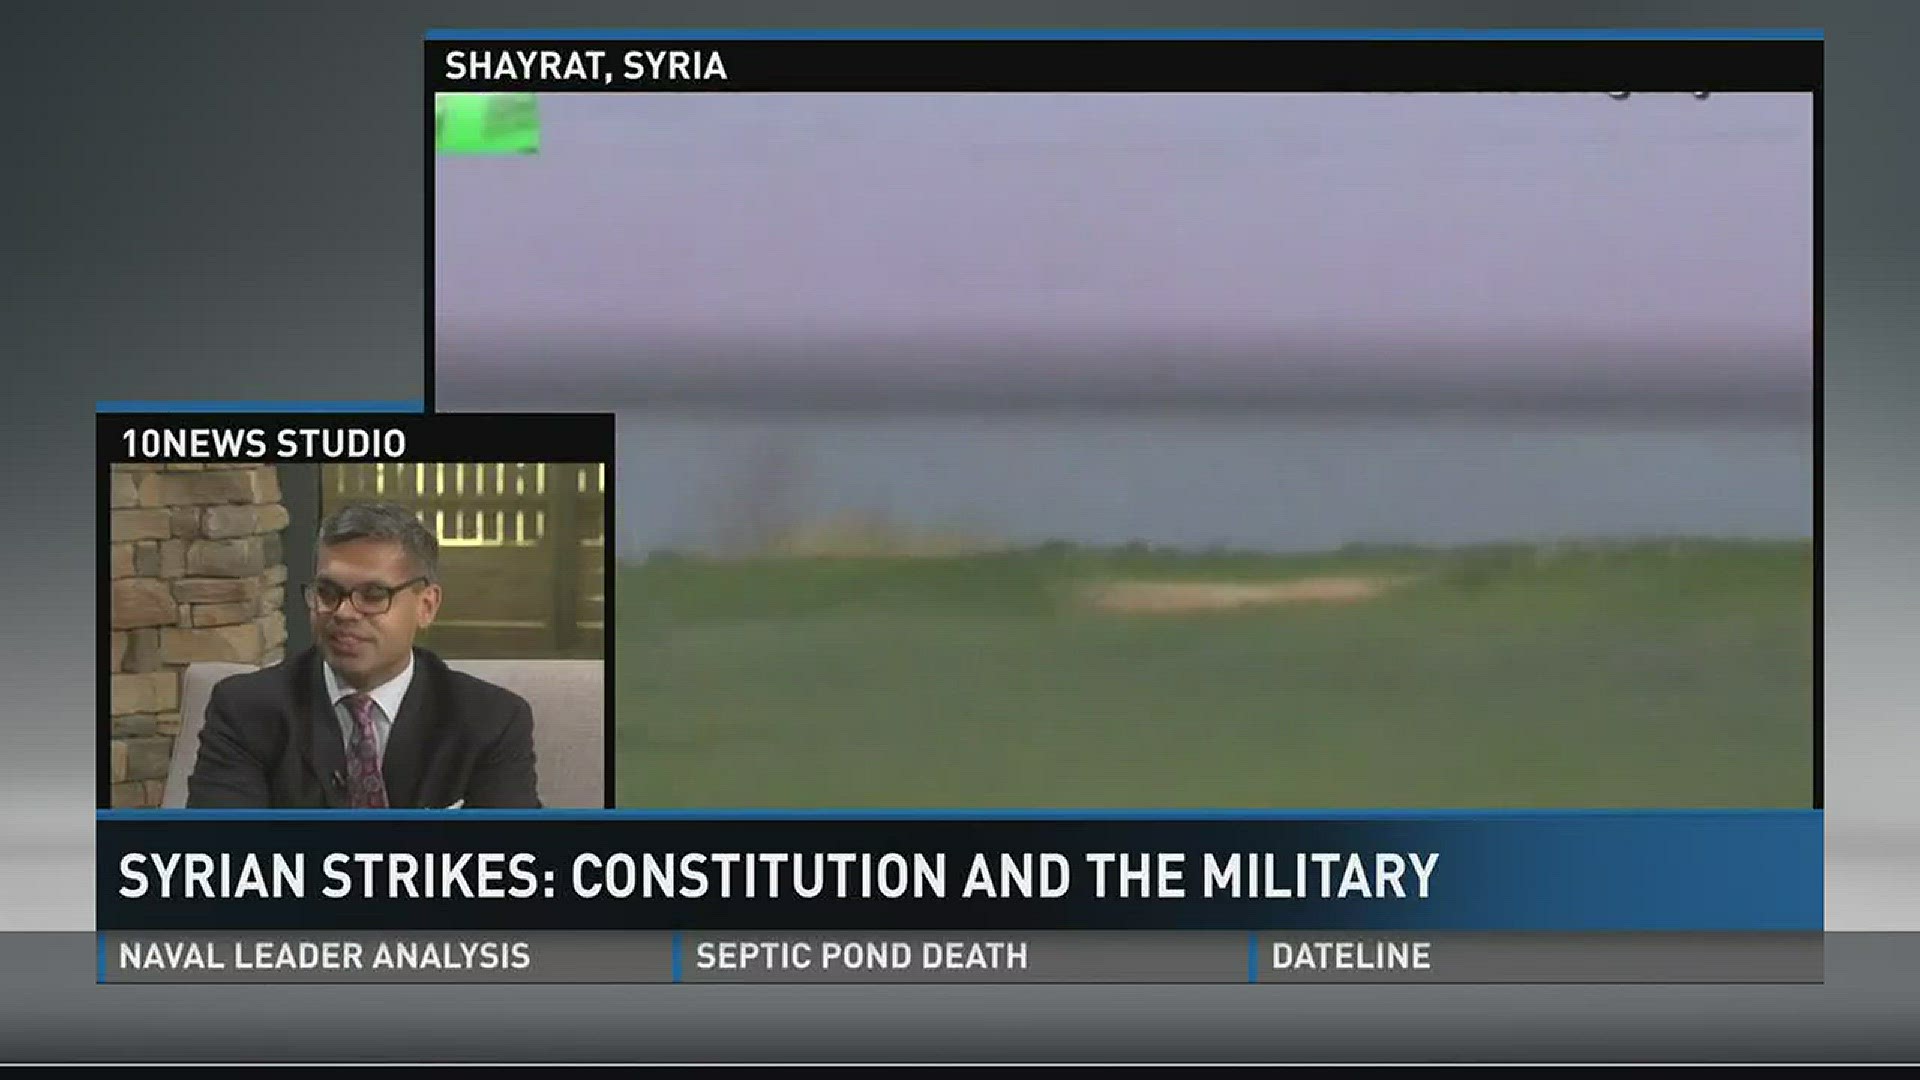 April 7, 2017: Akram Faizer, a constitutional law professor at Lincoln Memorial University, discusses President Trump's decision to order a missile strike in Syria.